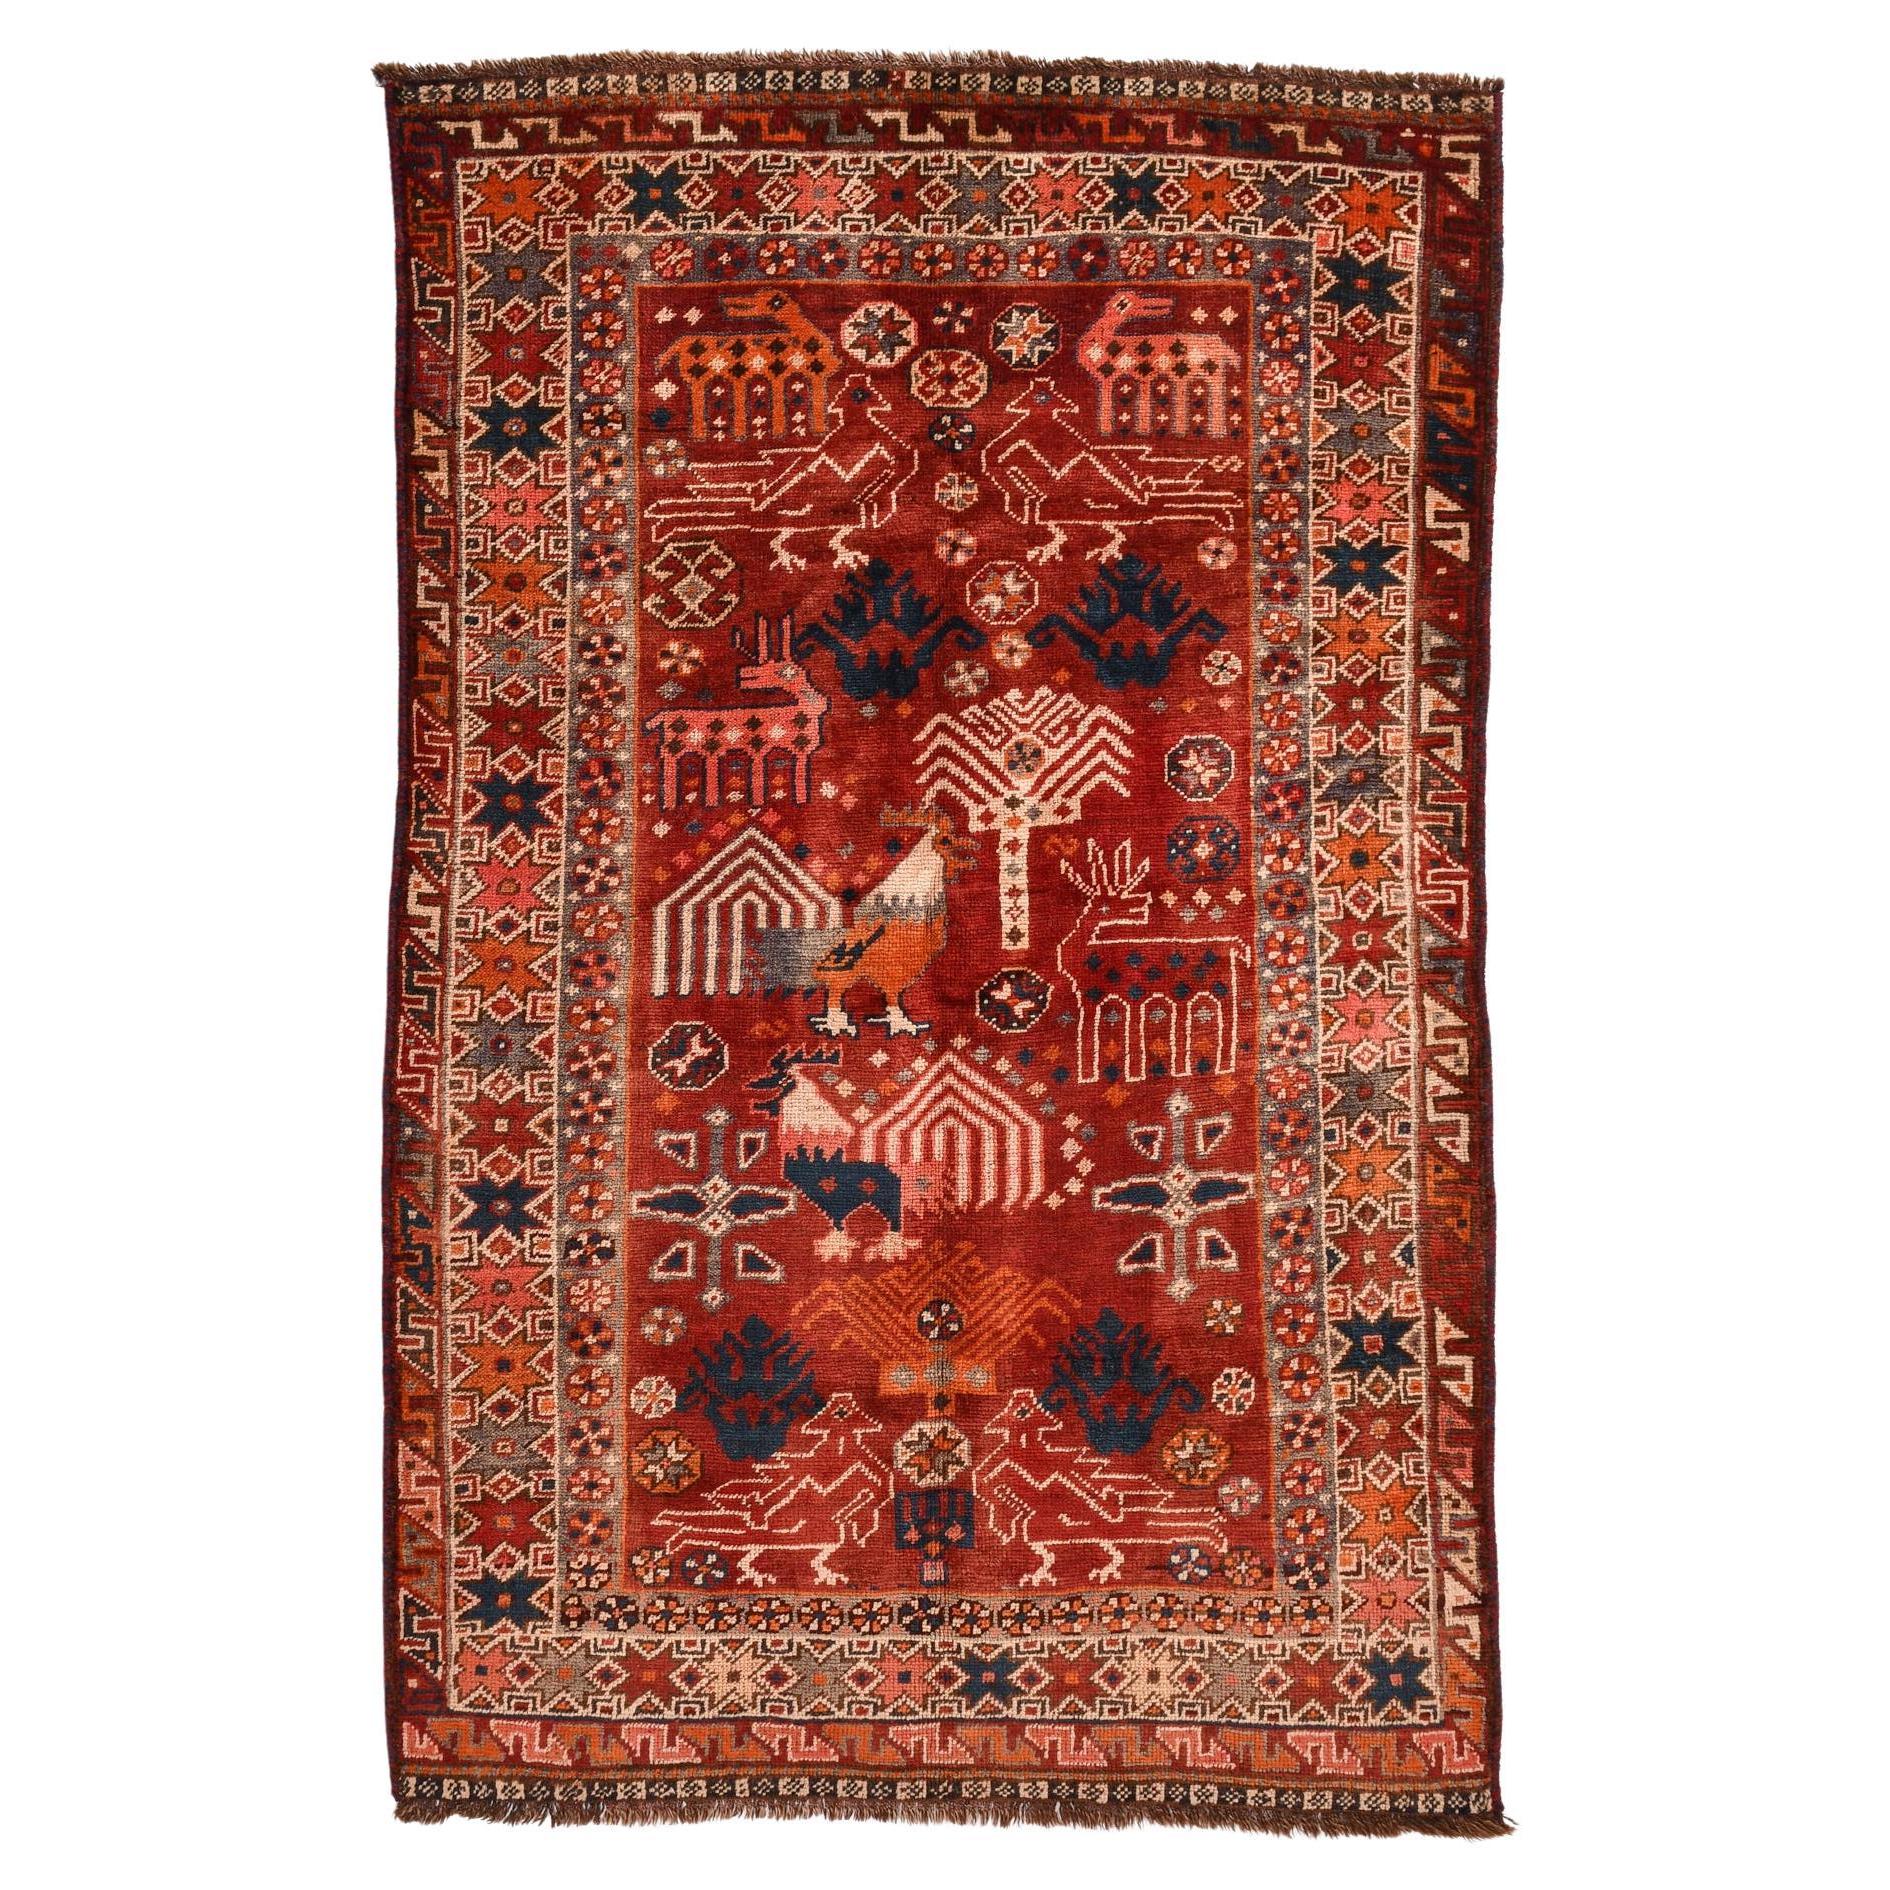 Old Nomadic Carpet from My Private Collection